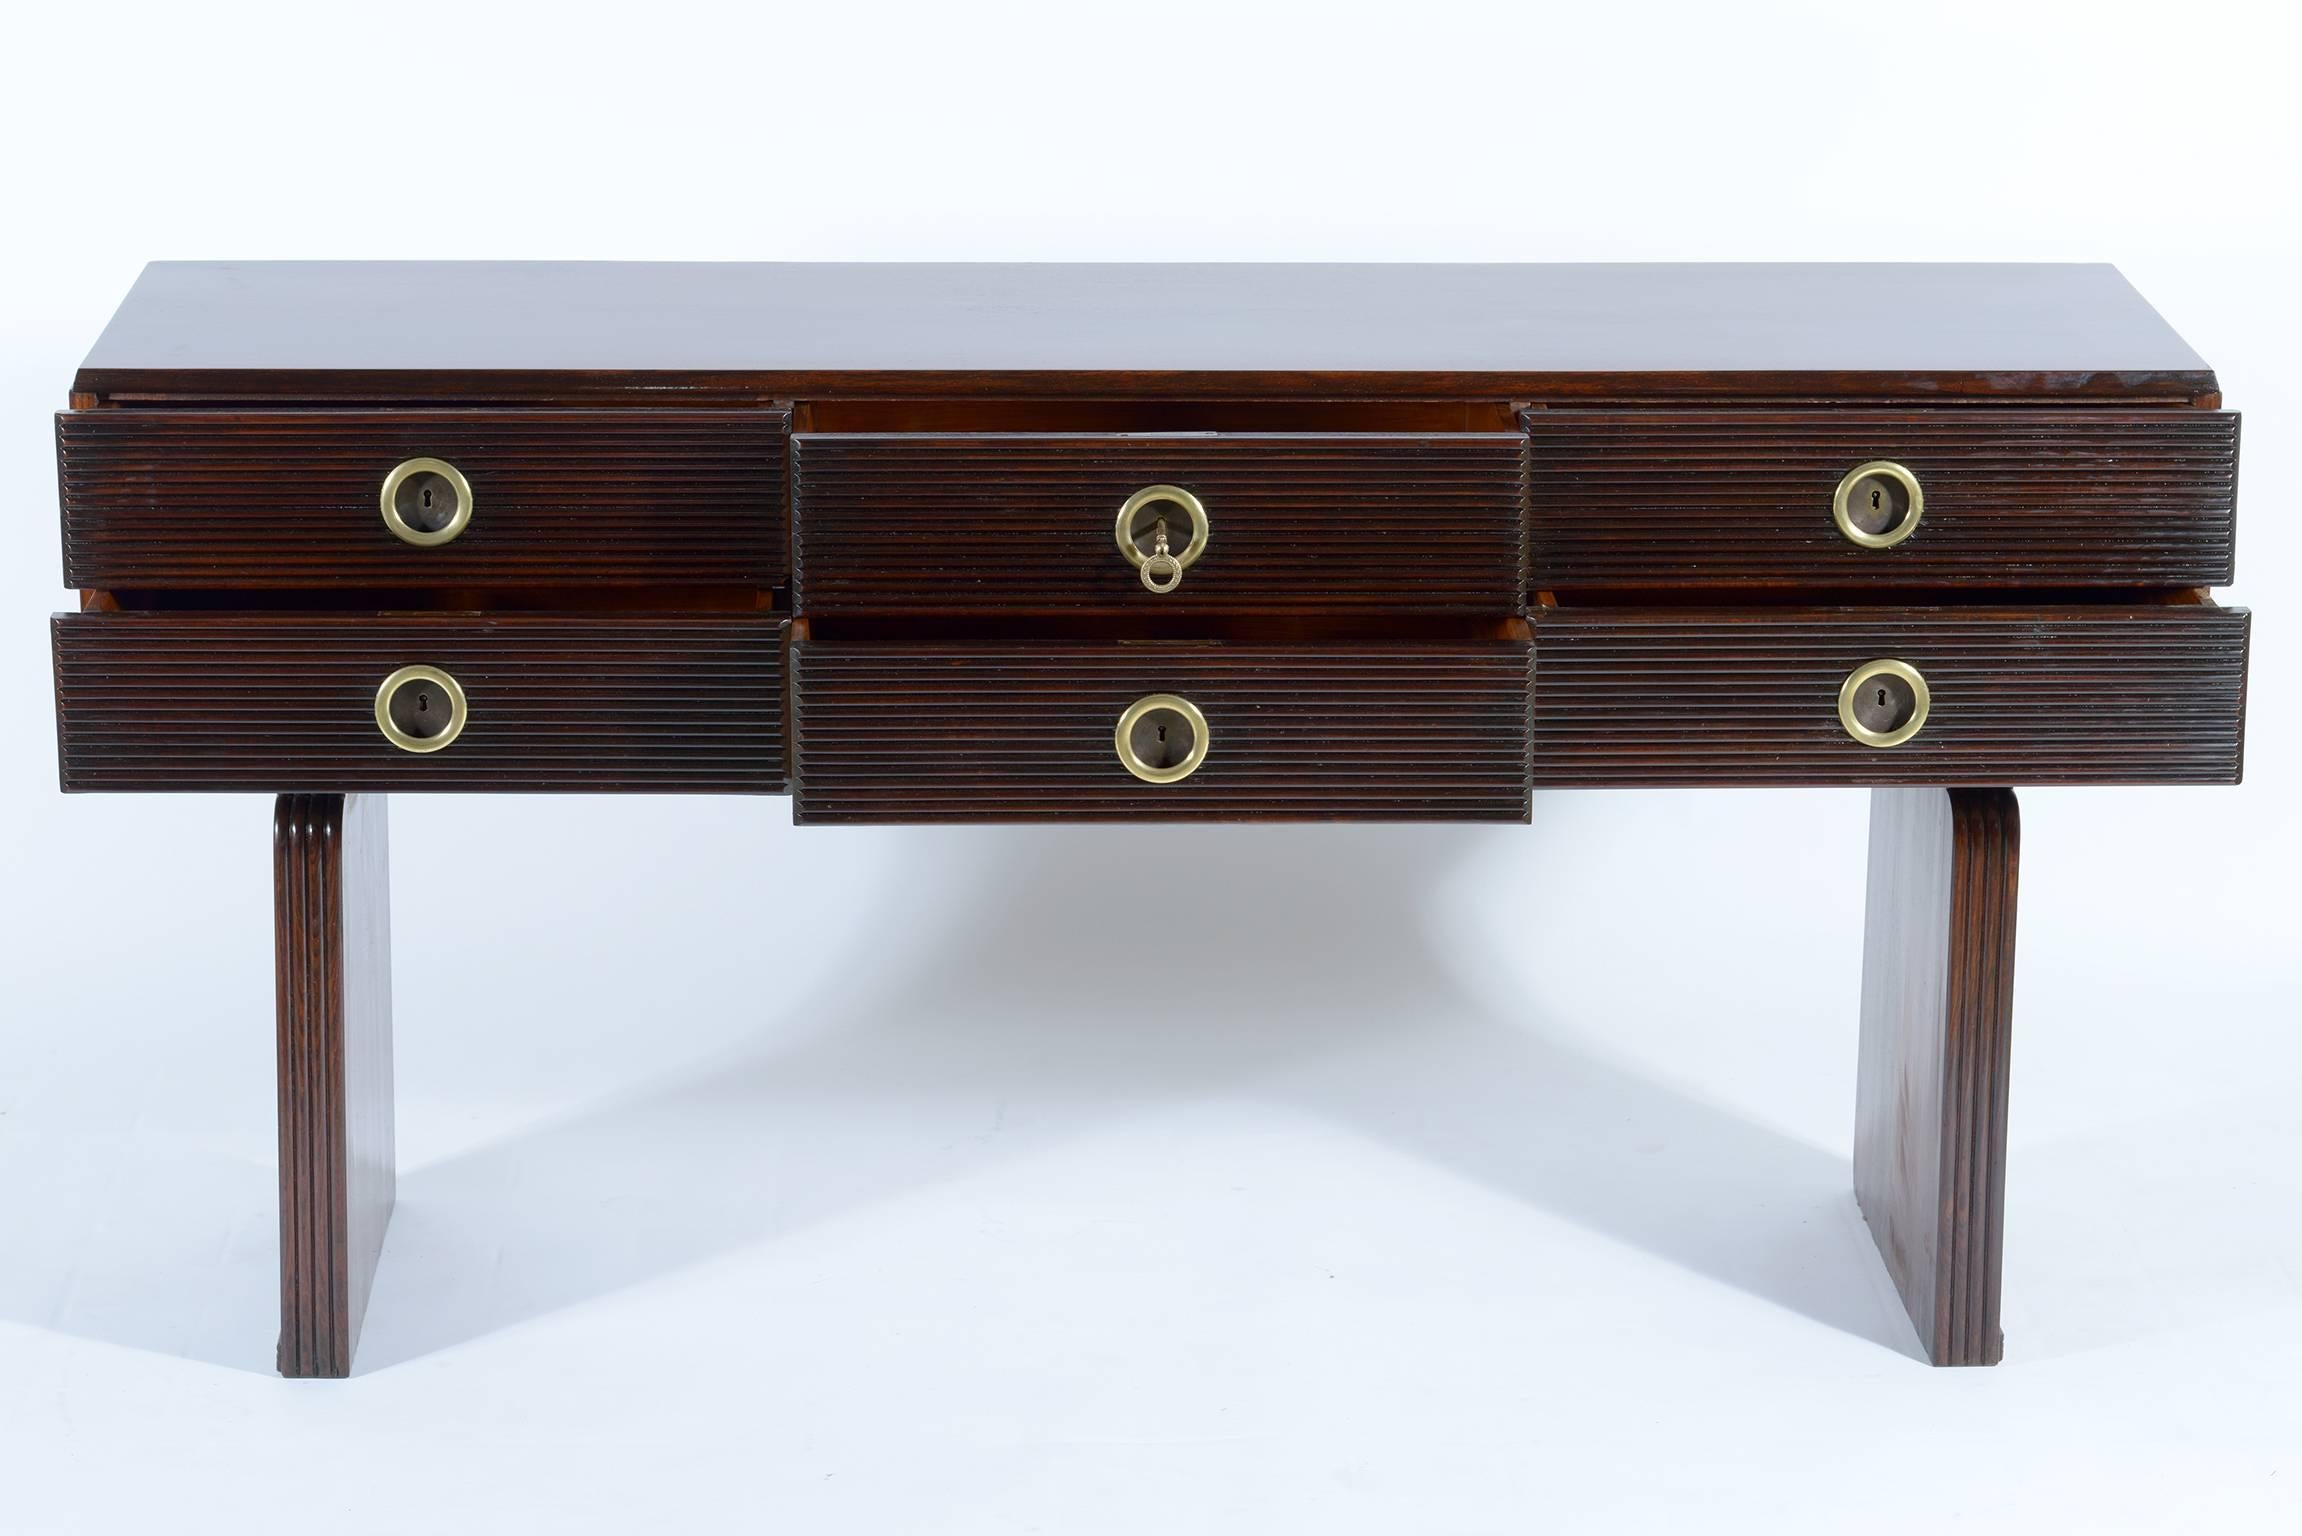 Paolo Buffa 1940 grooved solid walnut front with six drawers round cast brass handles and key, two side support.
This elegant console was designed by Paolo Buffa Milano Italy on the first midcentury.